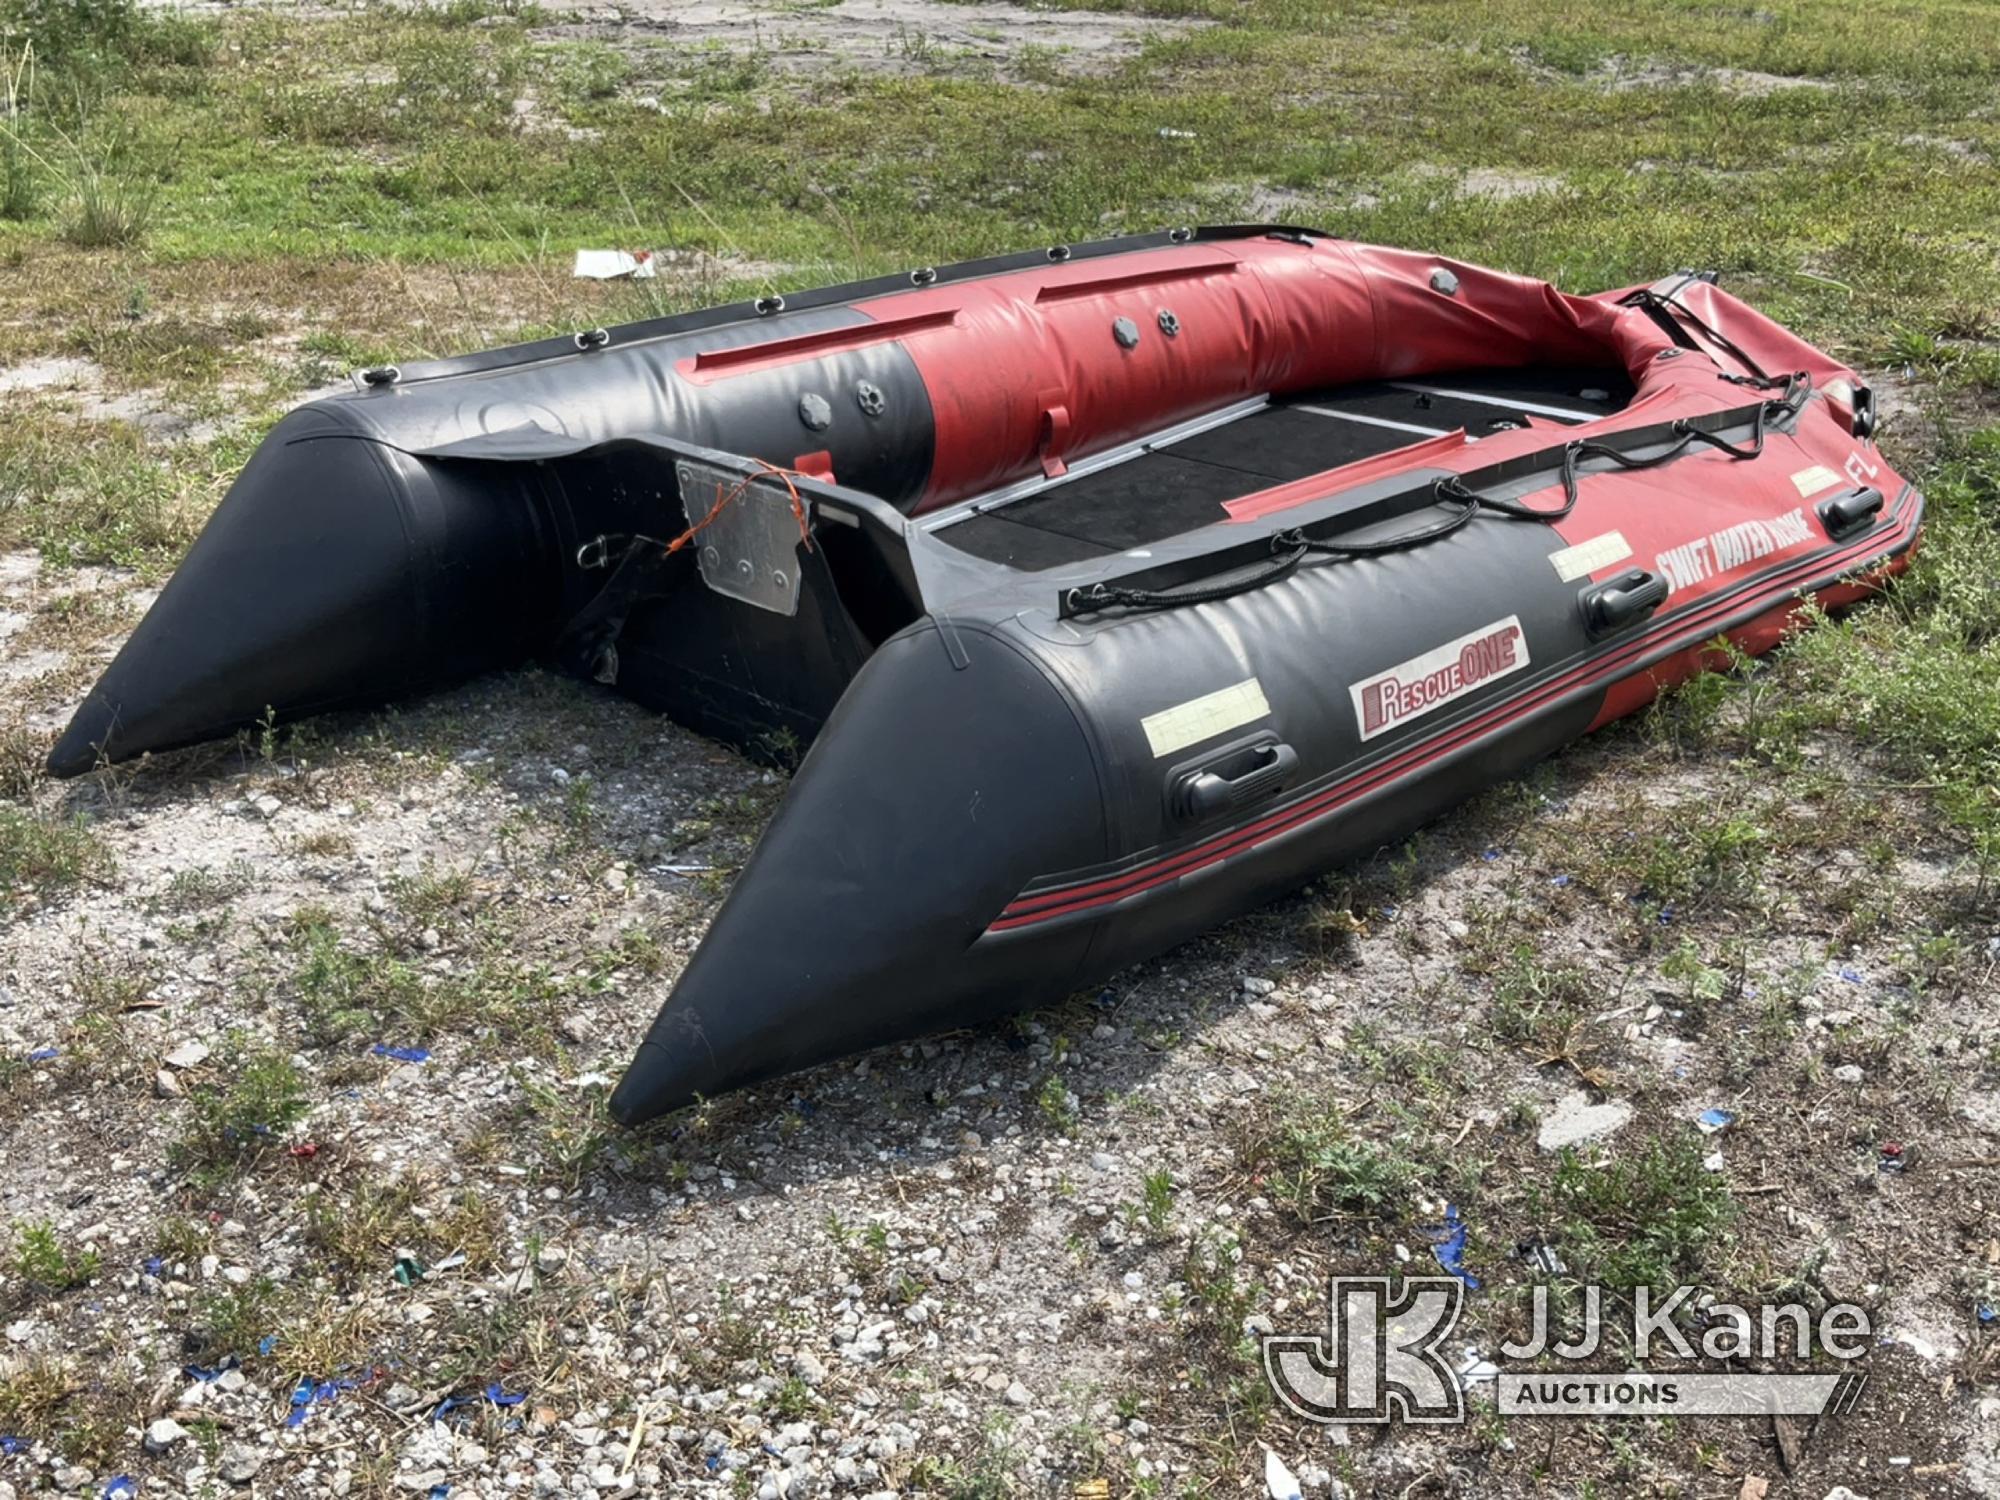 (Westlake, FL) 2018 RescueOne PRO-SA430 Inflatable Boat Seller States, Boat Will Need To Be Patched)